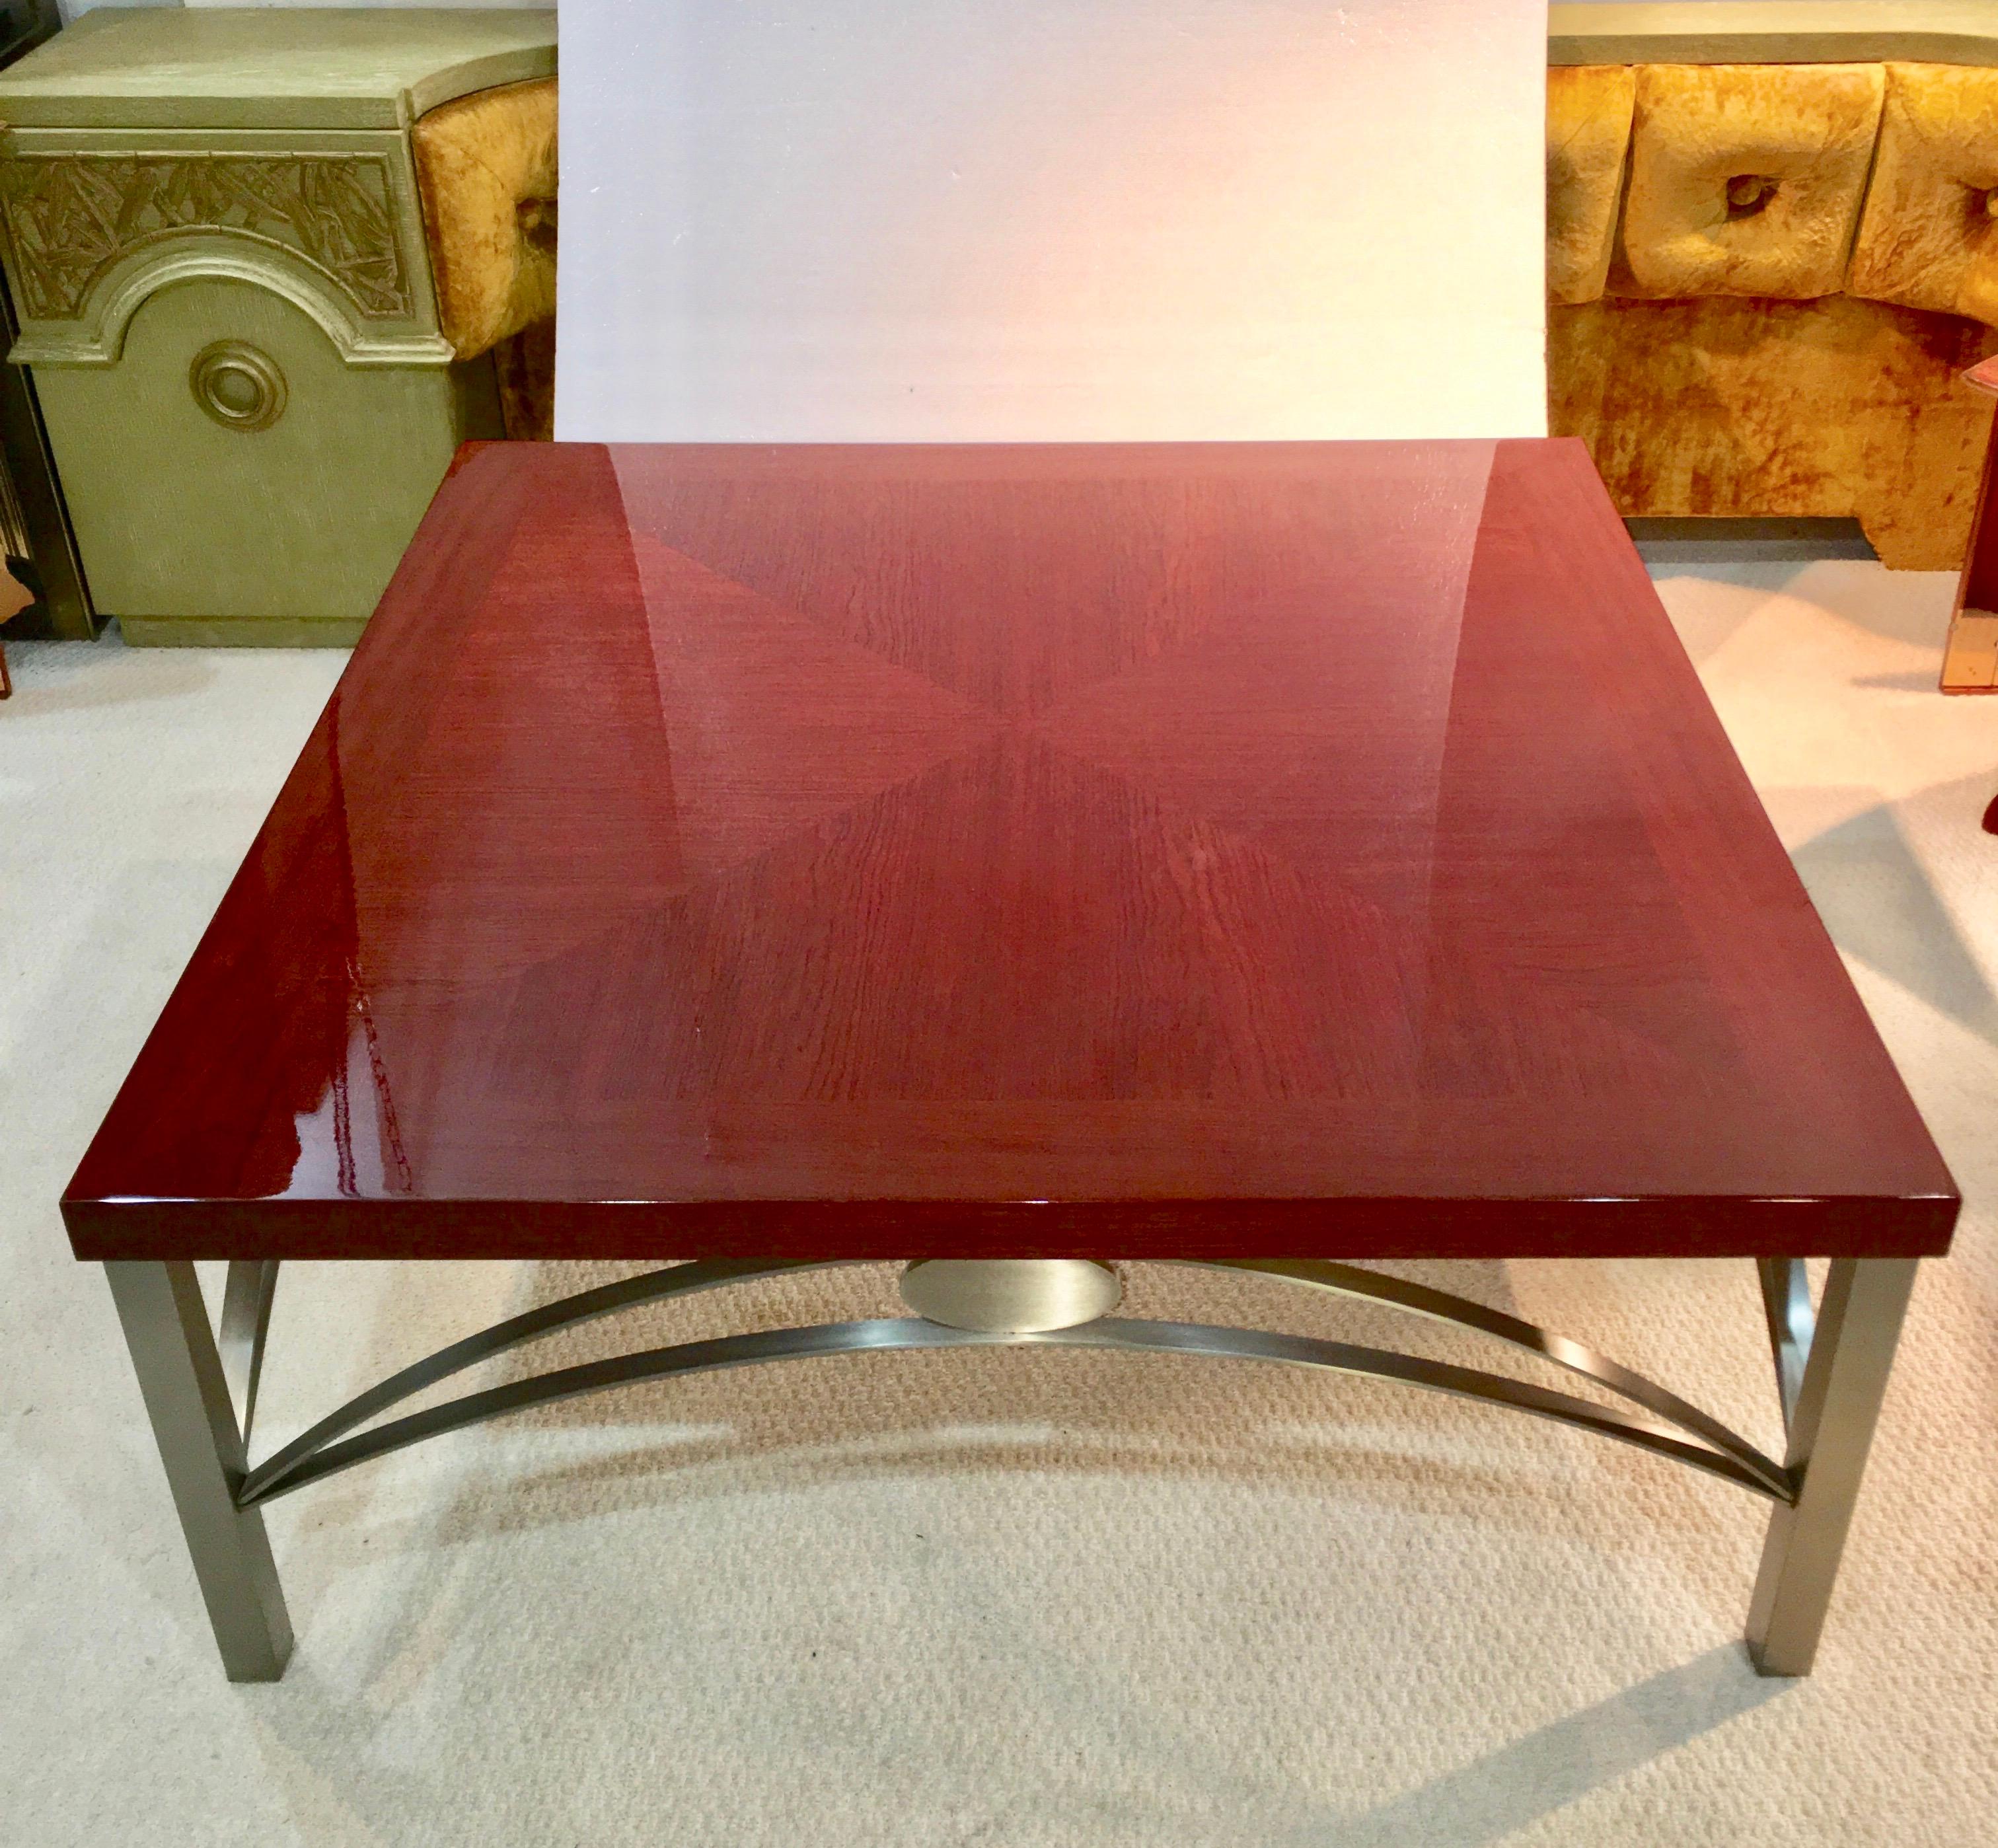 Vintage 1980s cocktail table with high gloss polished bookmatched Padauk square top on a brushed stainless steel base comprised of square legs and double arched stretchers embellished with hefty oval medallions. Maker unknown but superb quality.